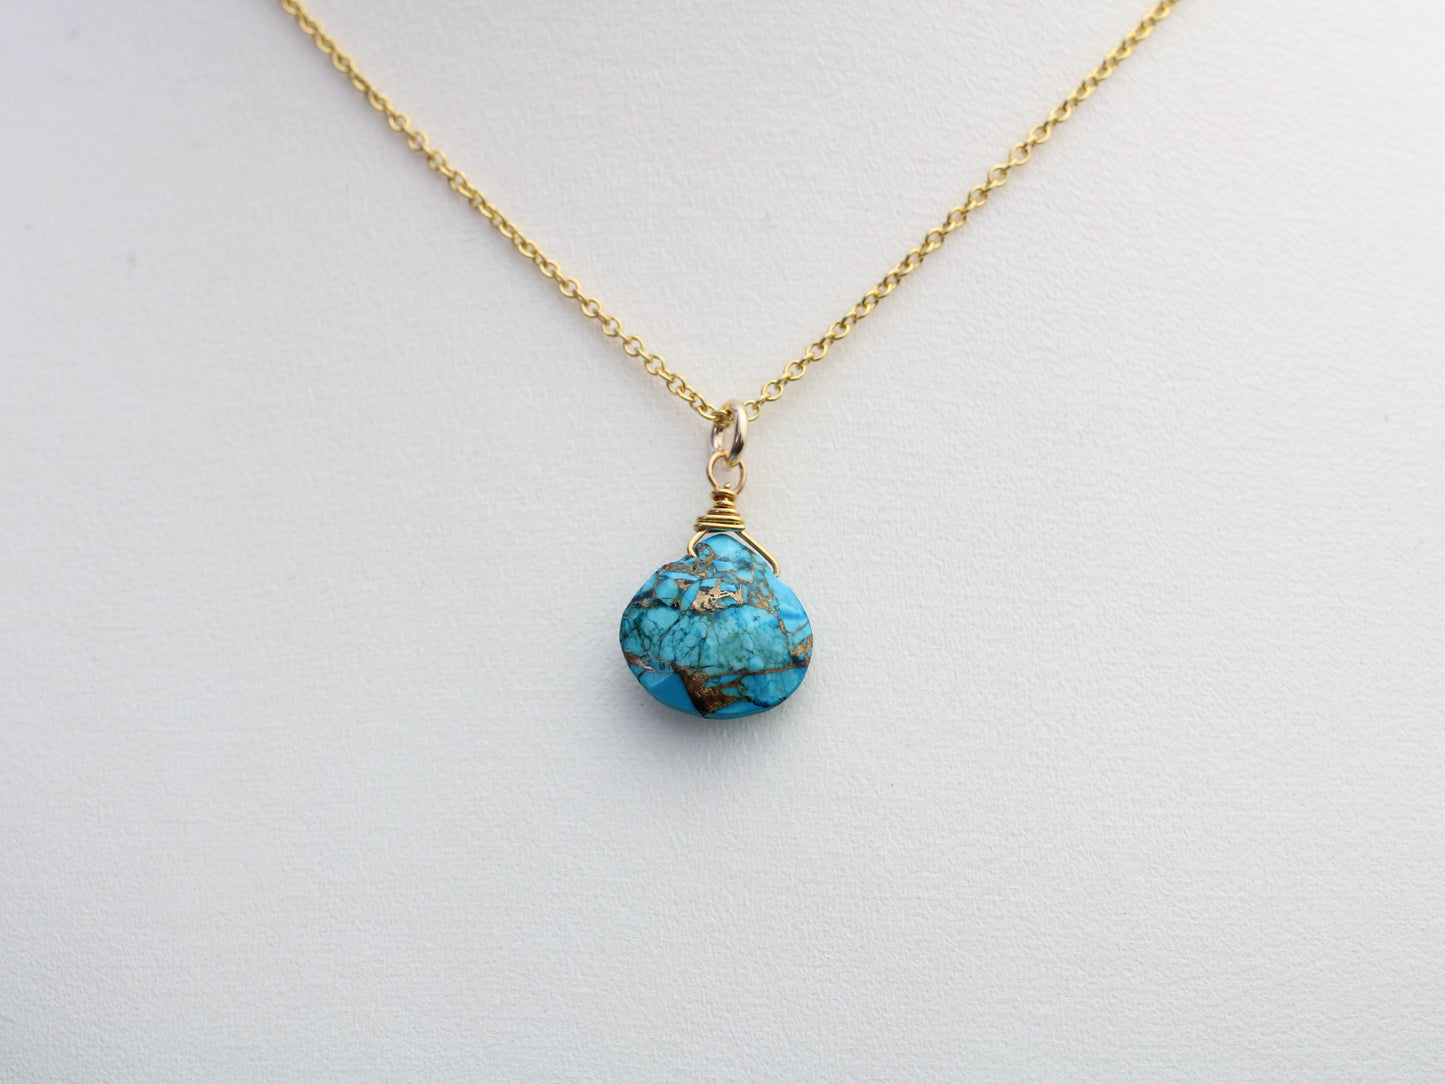 Turquoise necklace in sterling silver or gold. December birthstone necklace.